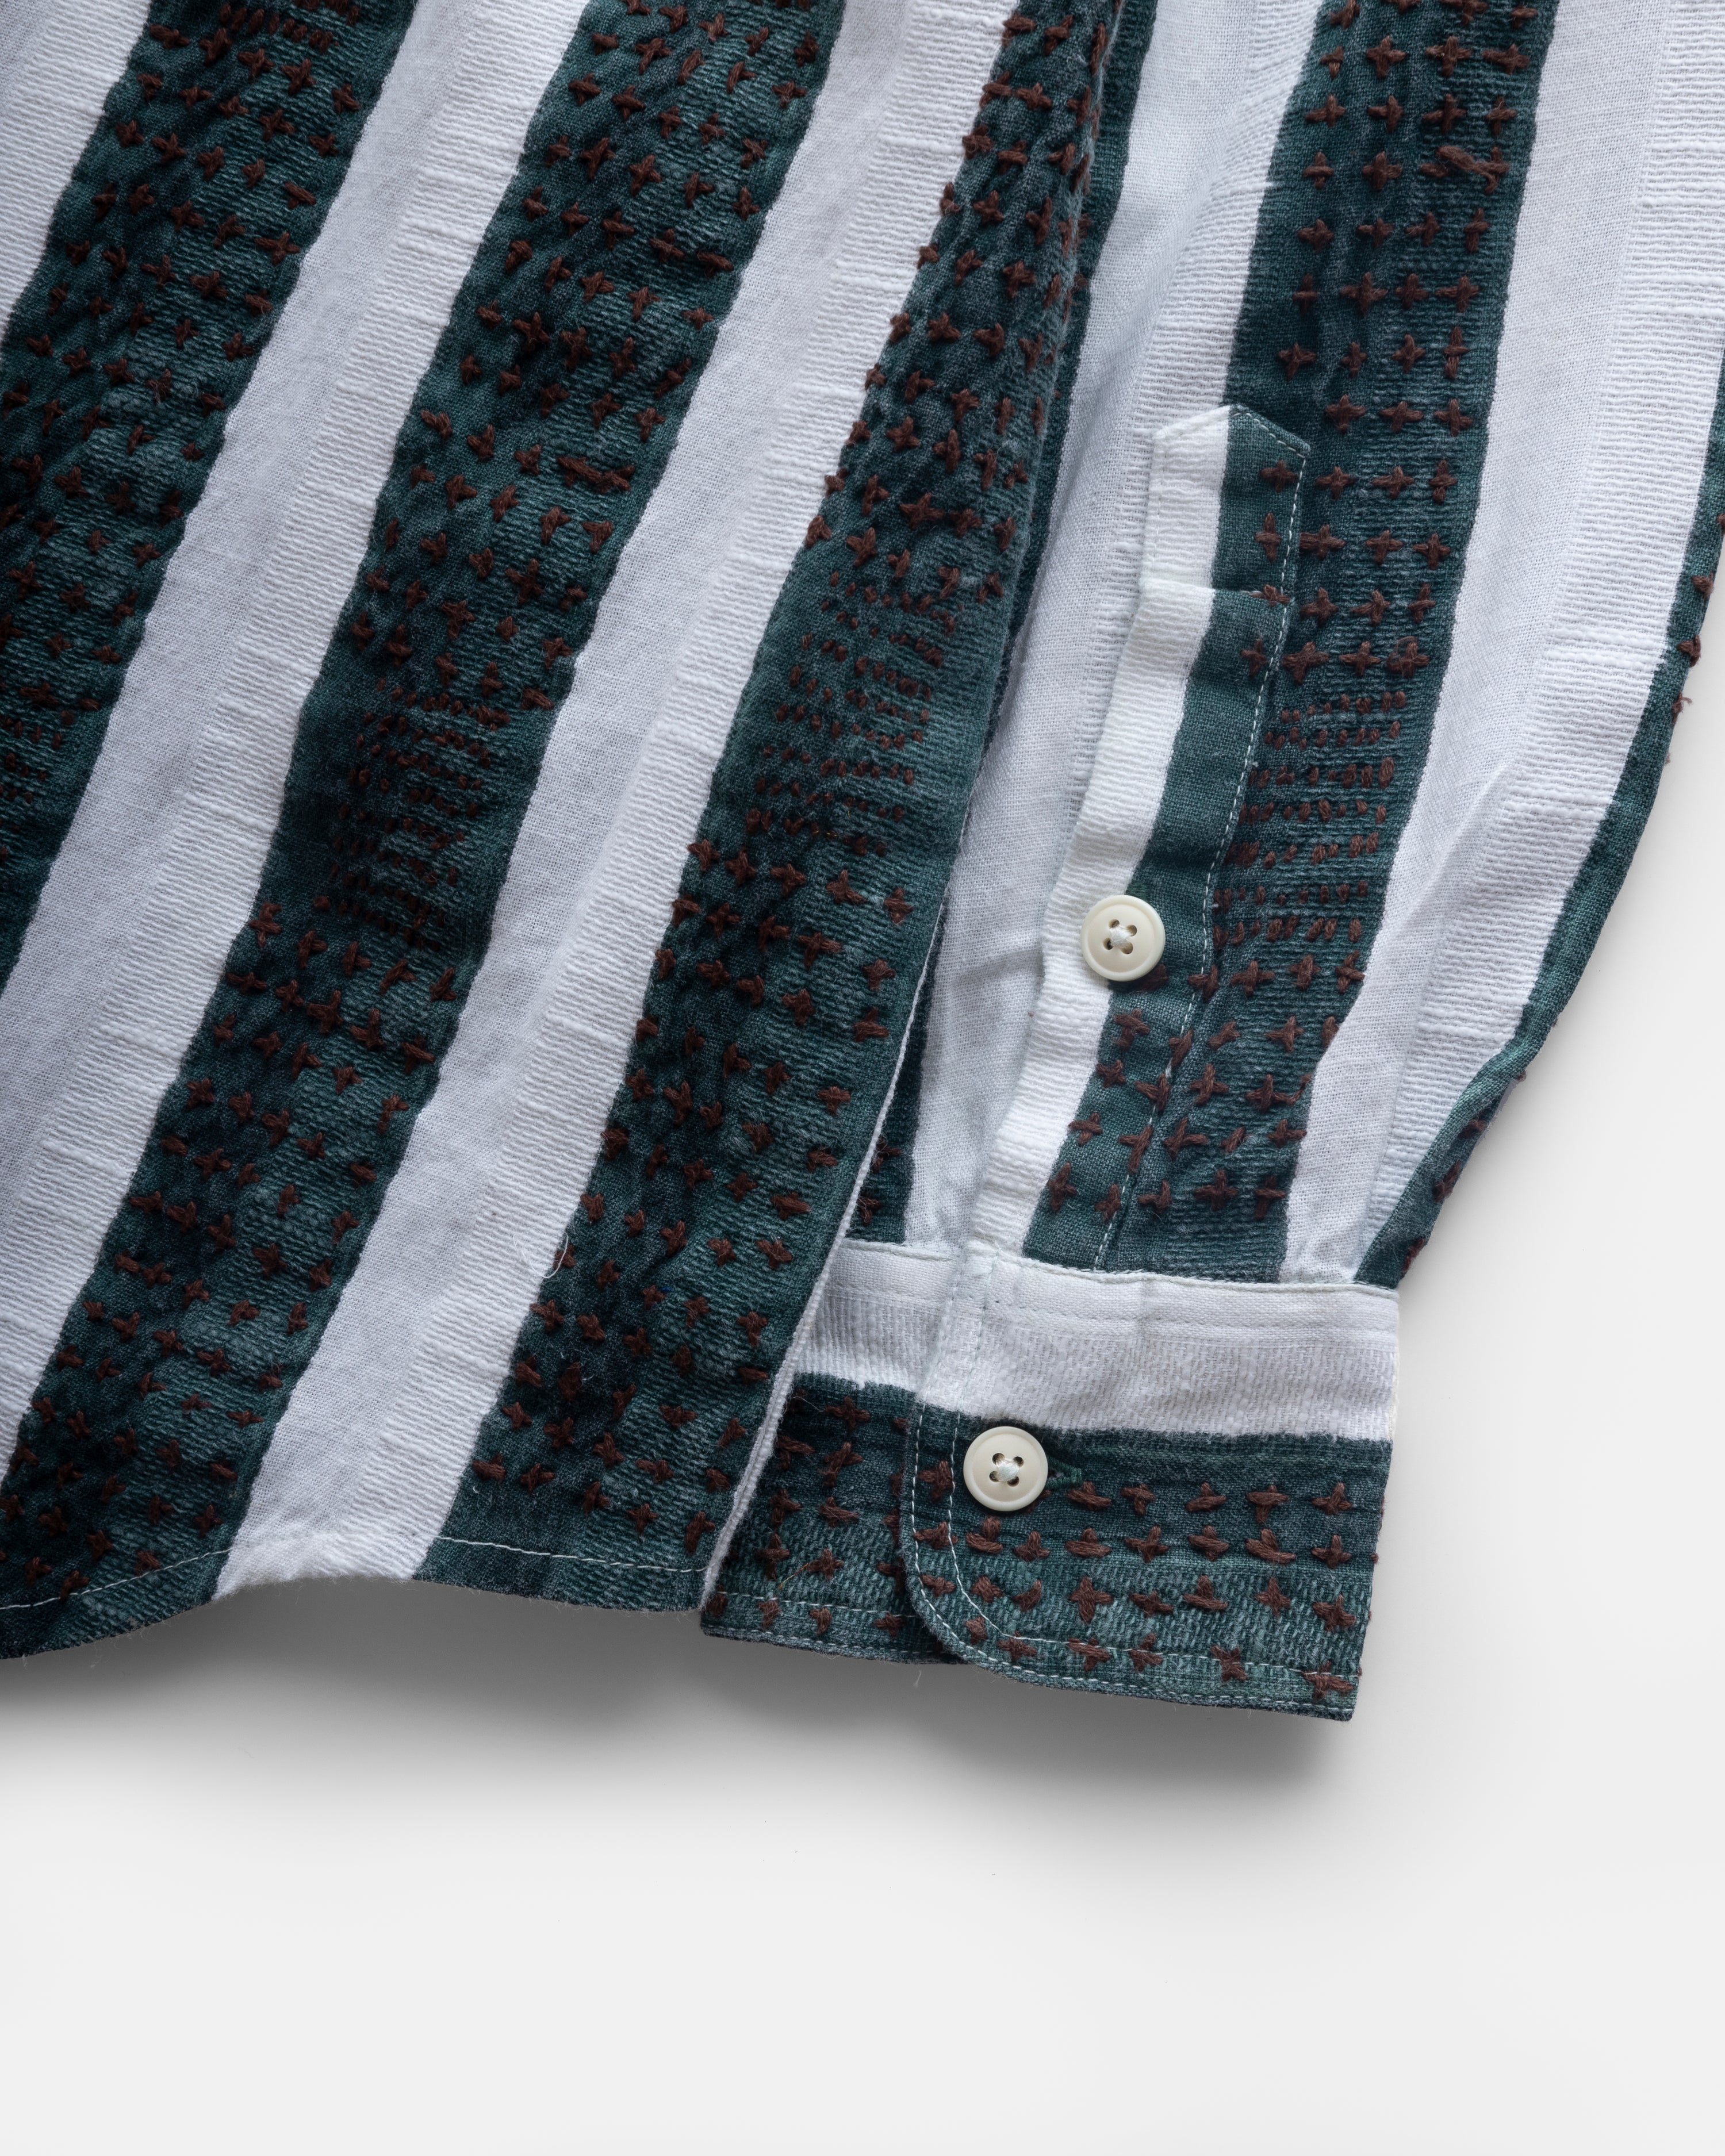 CHESTNUT BUTTON-DOWN SHIRT - NATURAL / BOTTLE / CAFFE BLOCK PRINTED AND HAND EMBROIDERED JACQUARD STRIPE COTTON